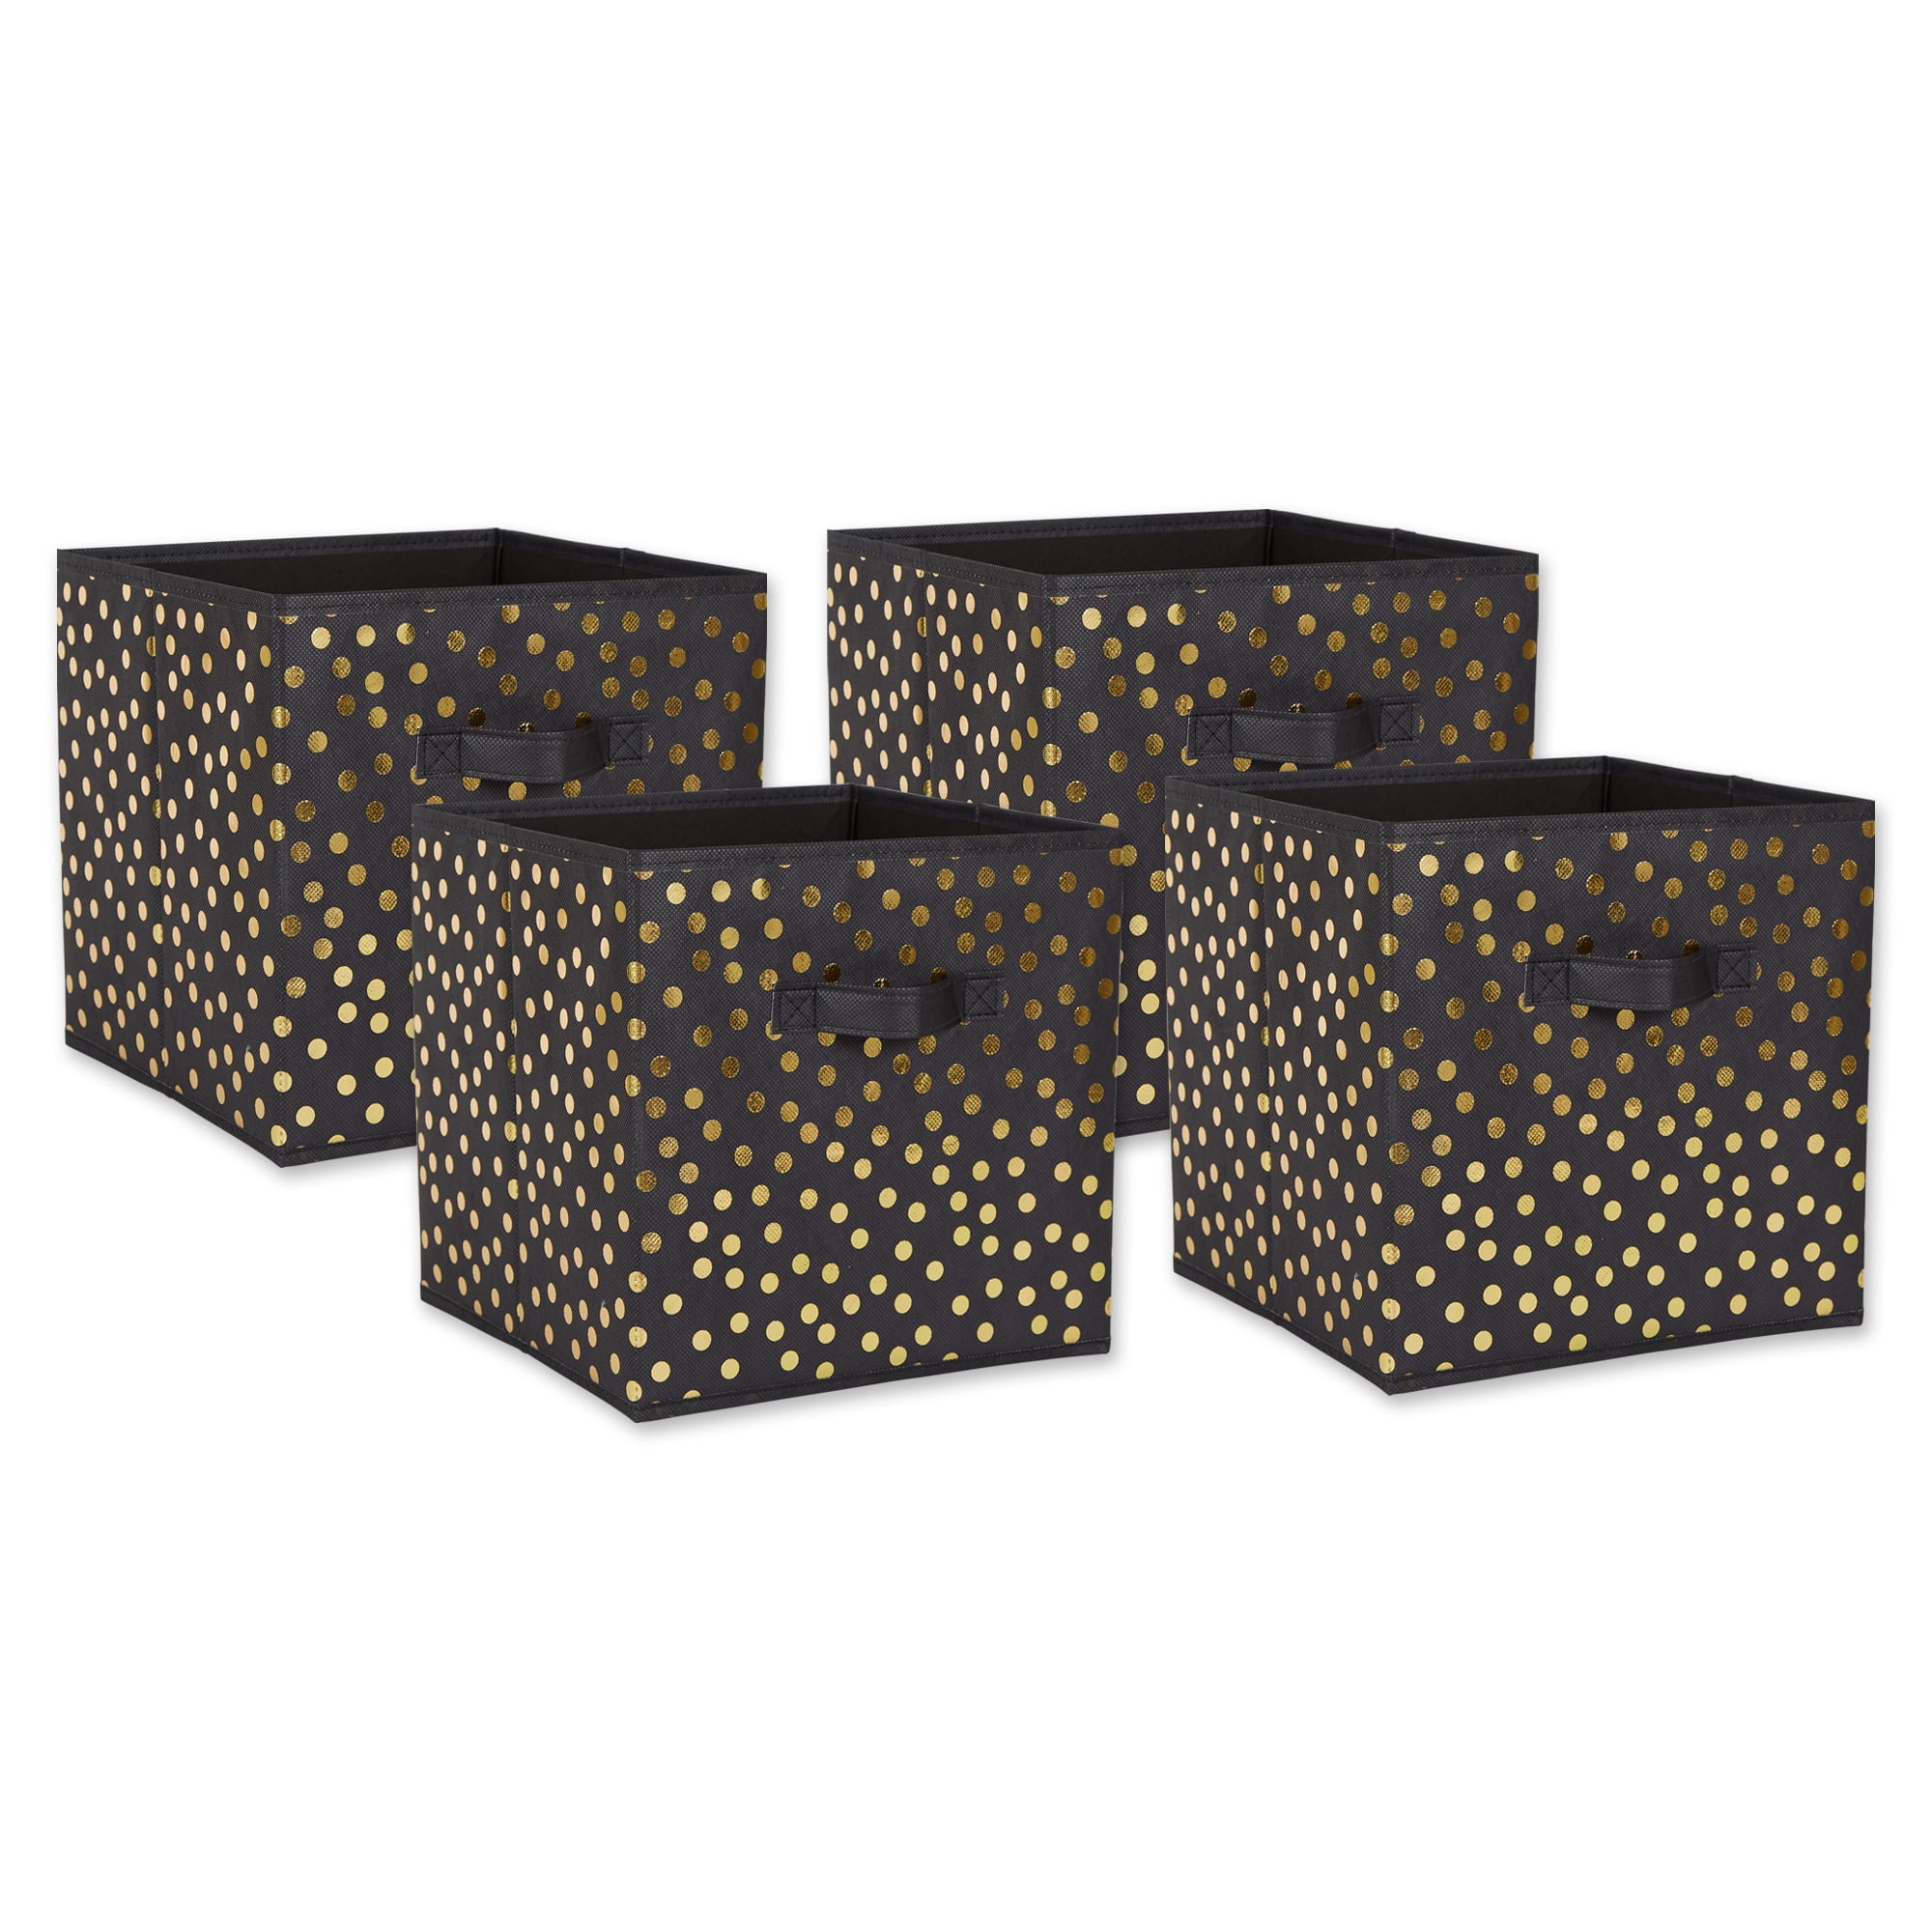 11x11x11 Cube Small Set 2 Piece DII Non Woven Storage Collection Polka Dot Collapsible Bin Black & Gold 